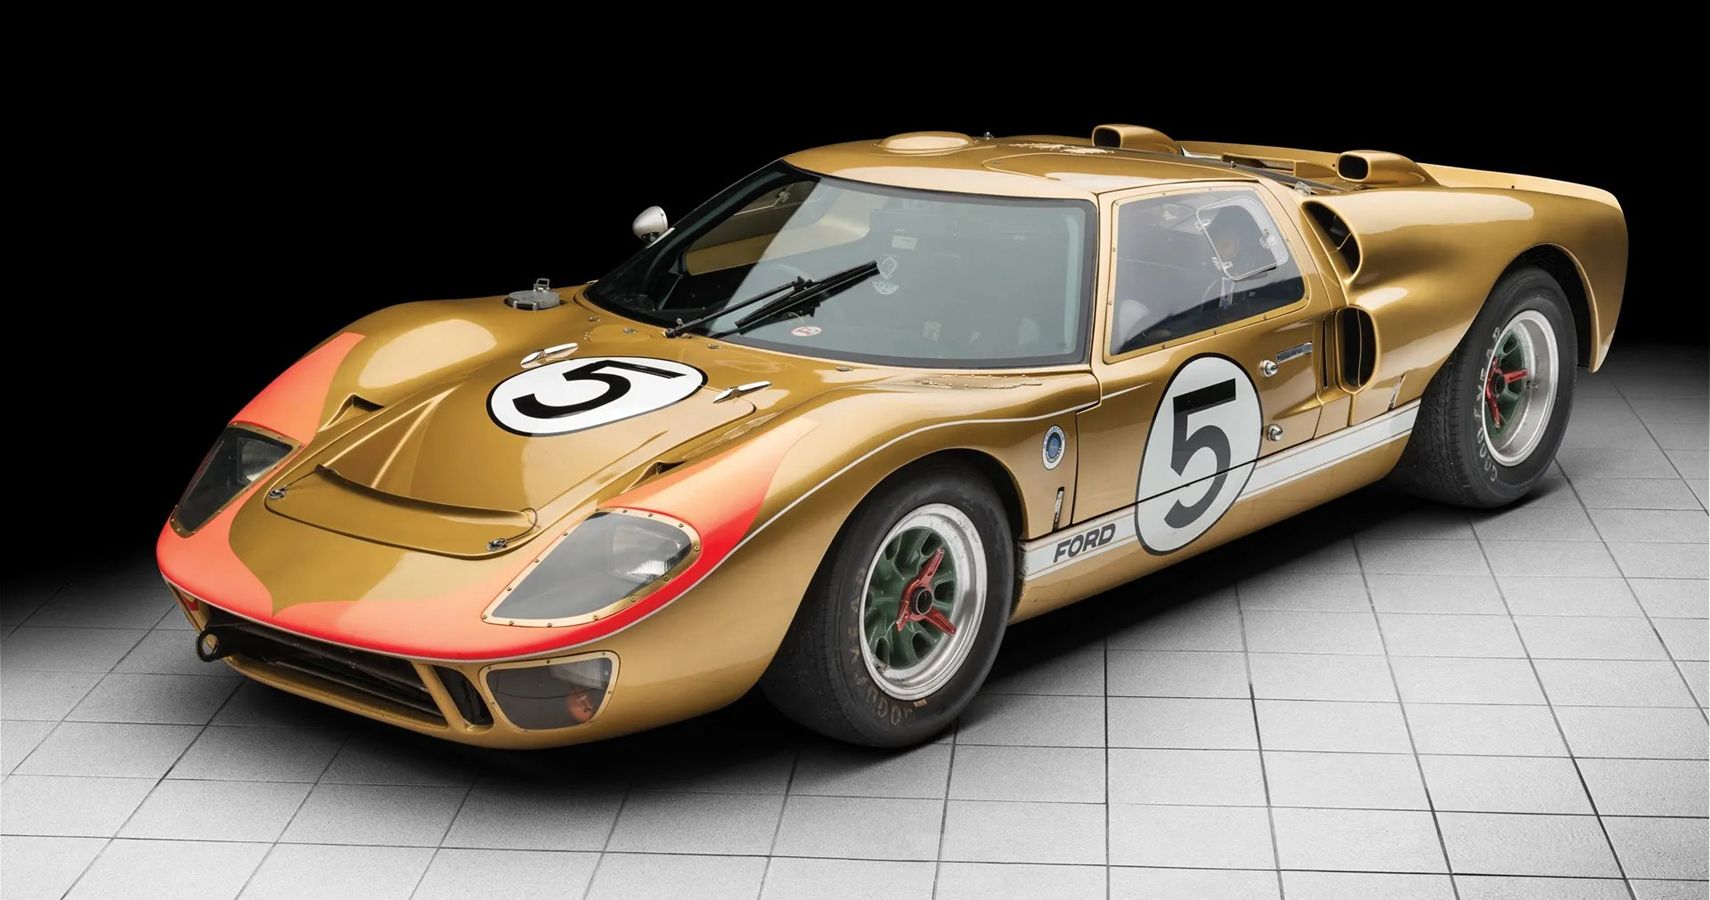 1966 Ford GT40 Mk II In Gold That Finished Third In The 1966 Le Mans 